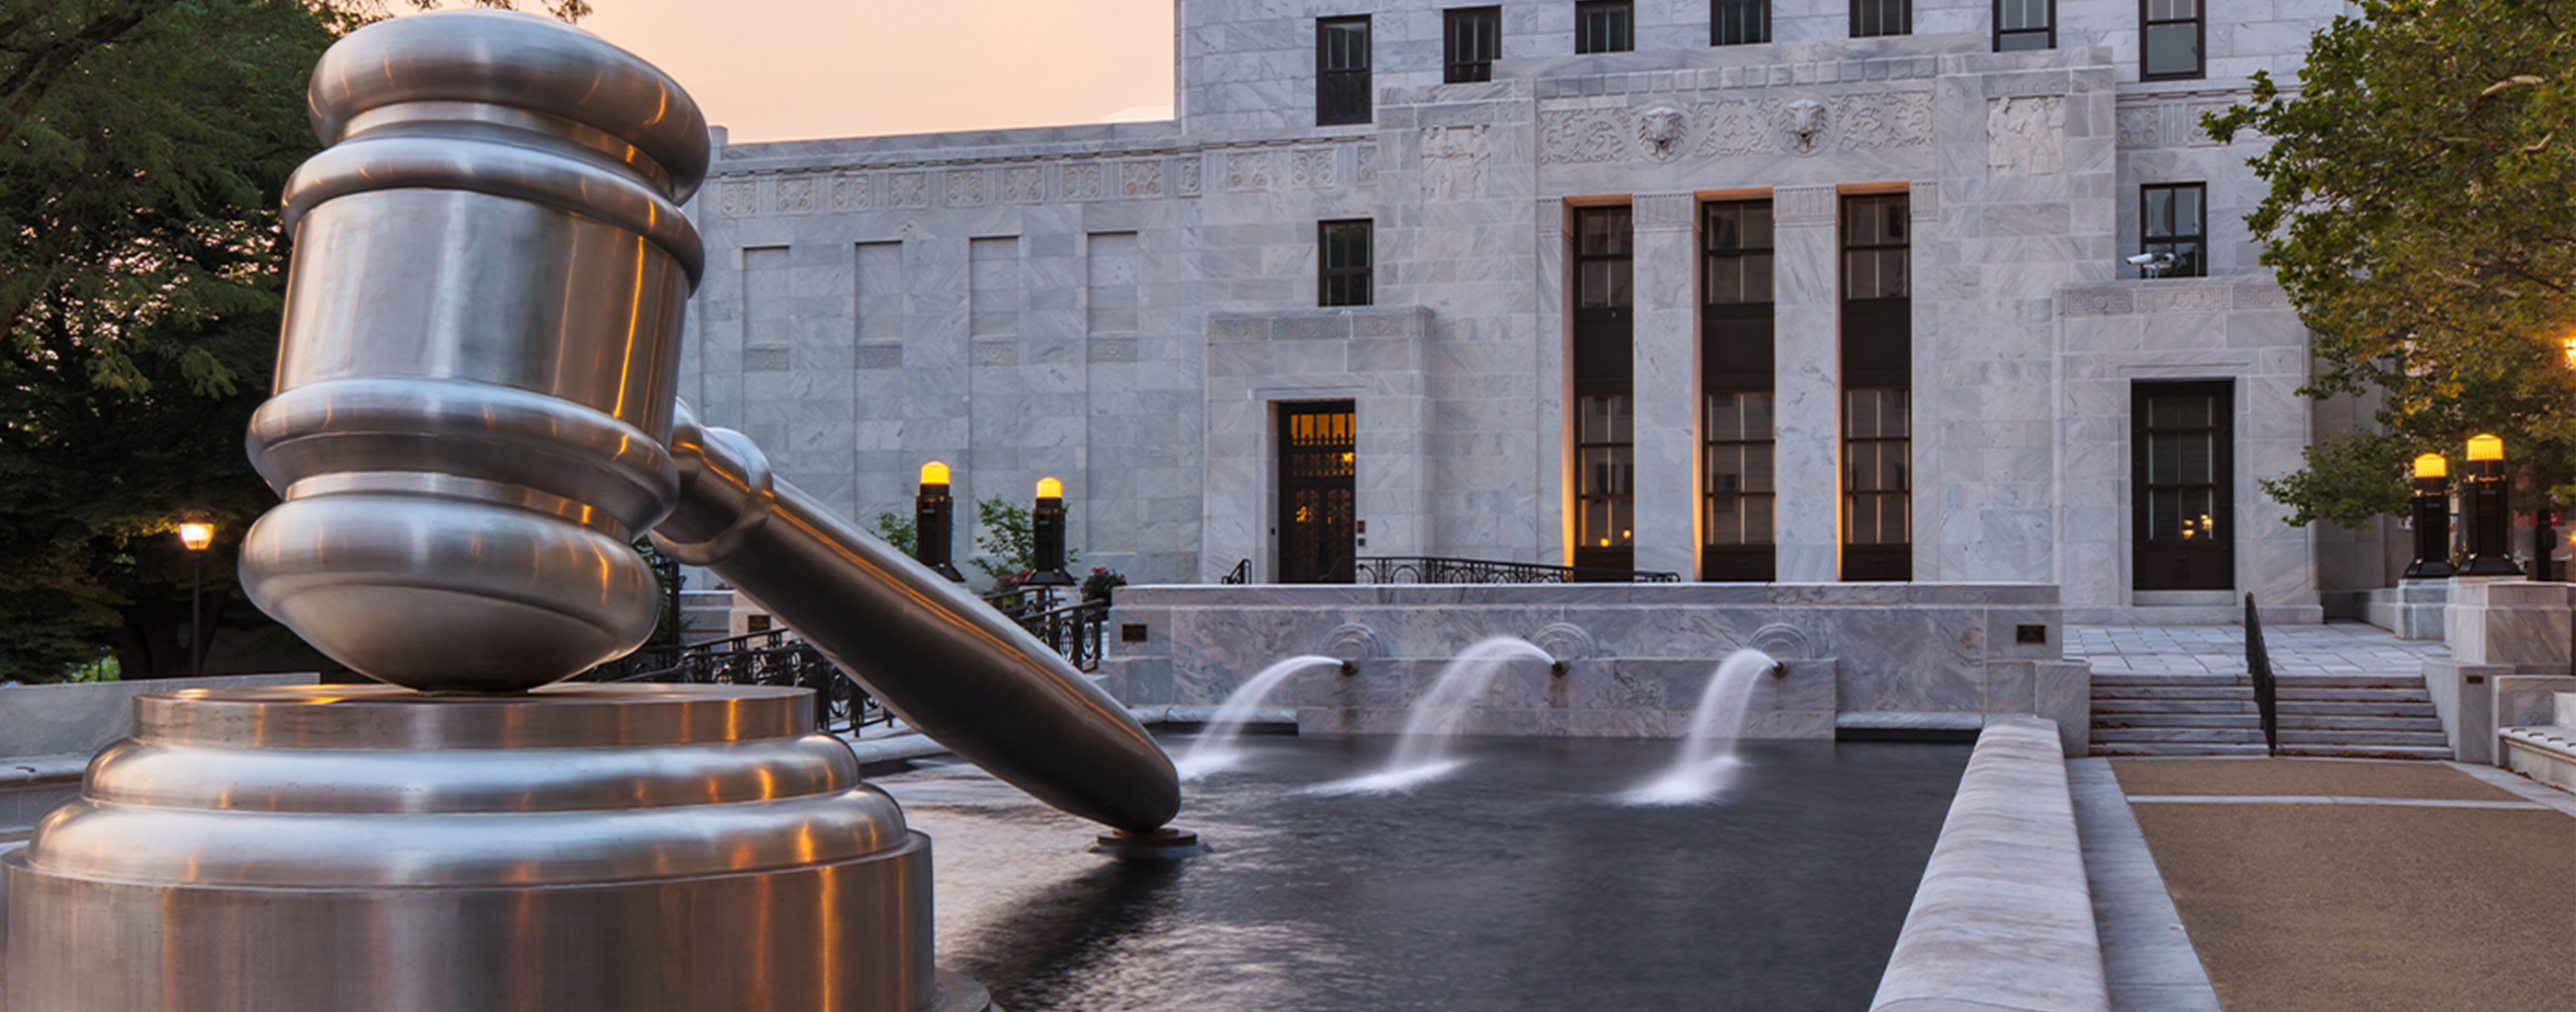 Newly renovated fountain pool located in front of the historic Ohio Supreme Court building.